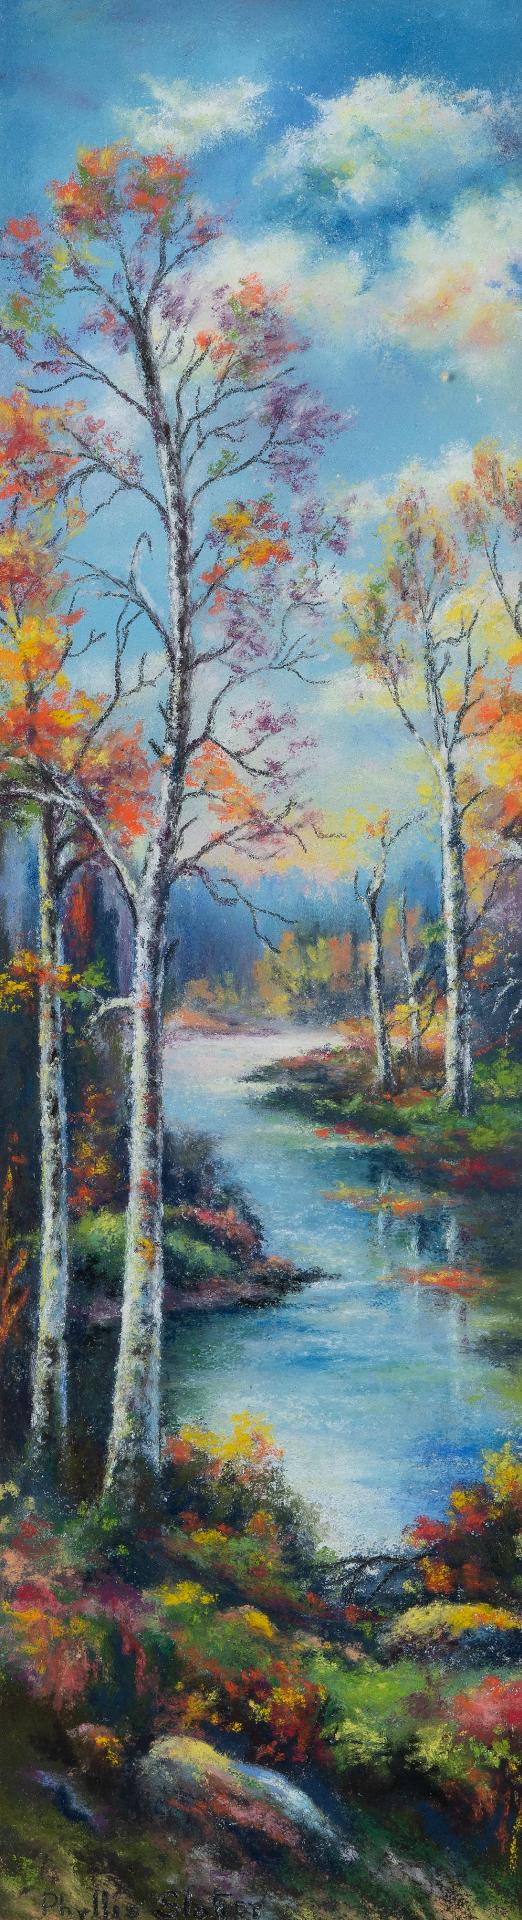 Phyllis Slater - Creek in the Woods